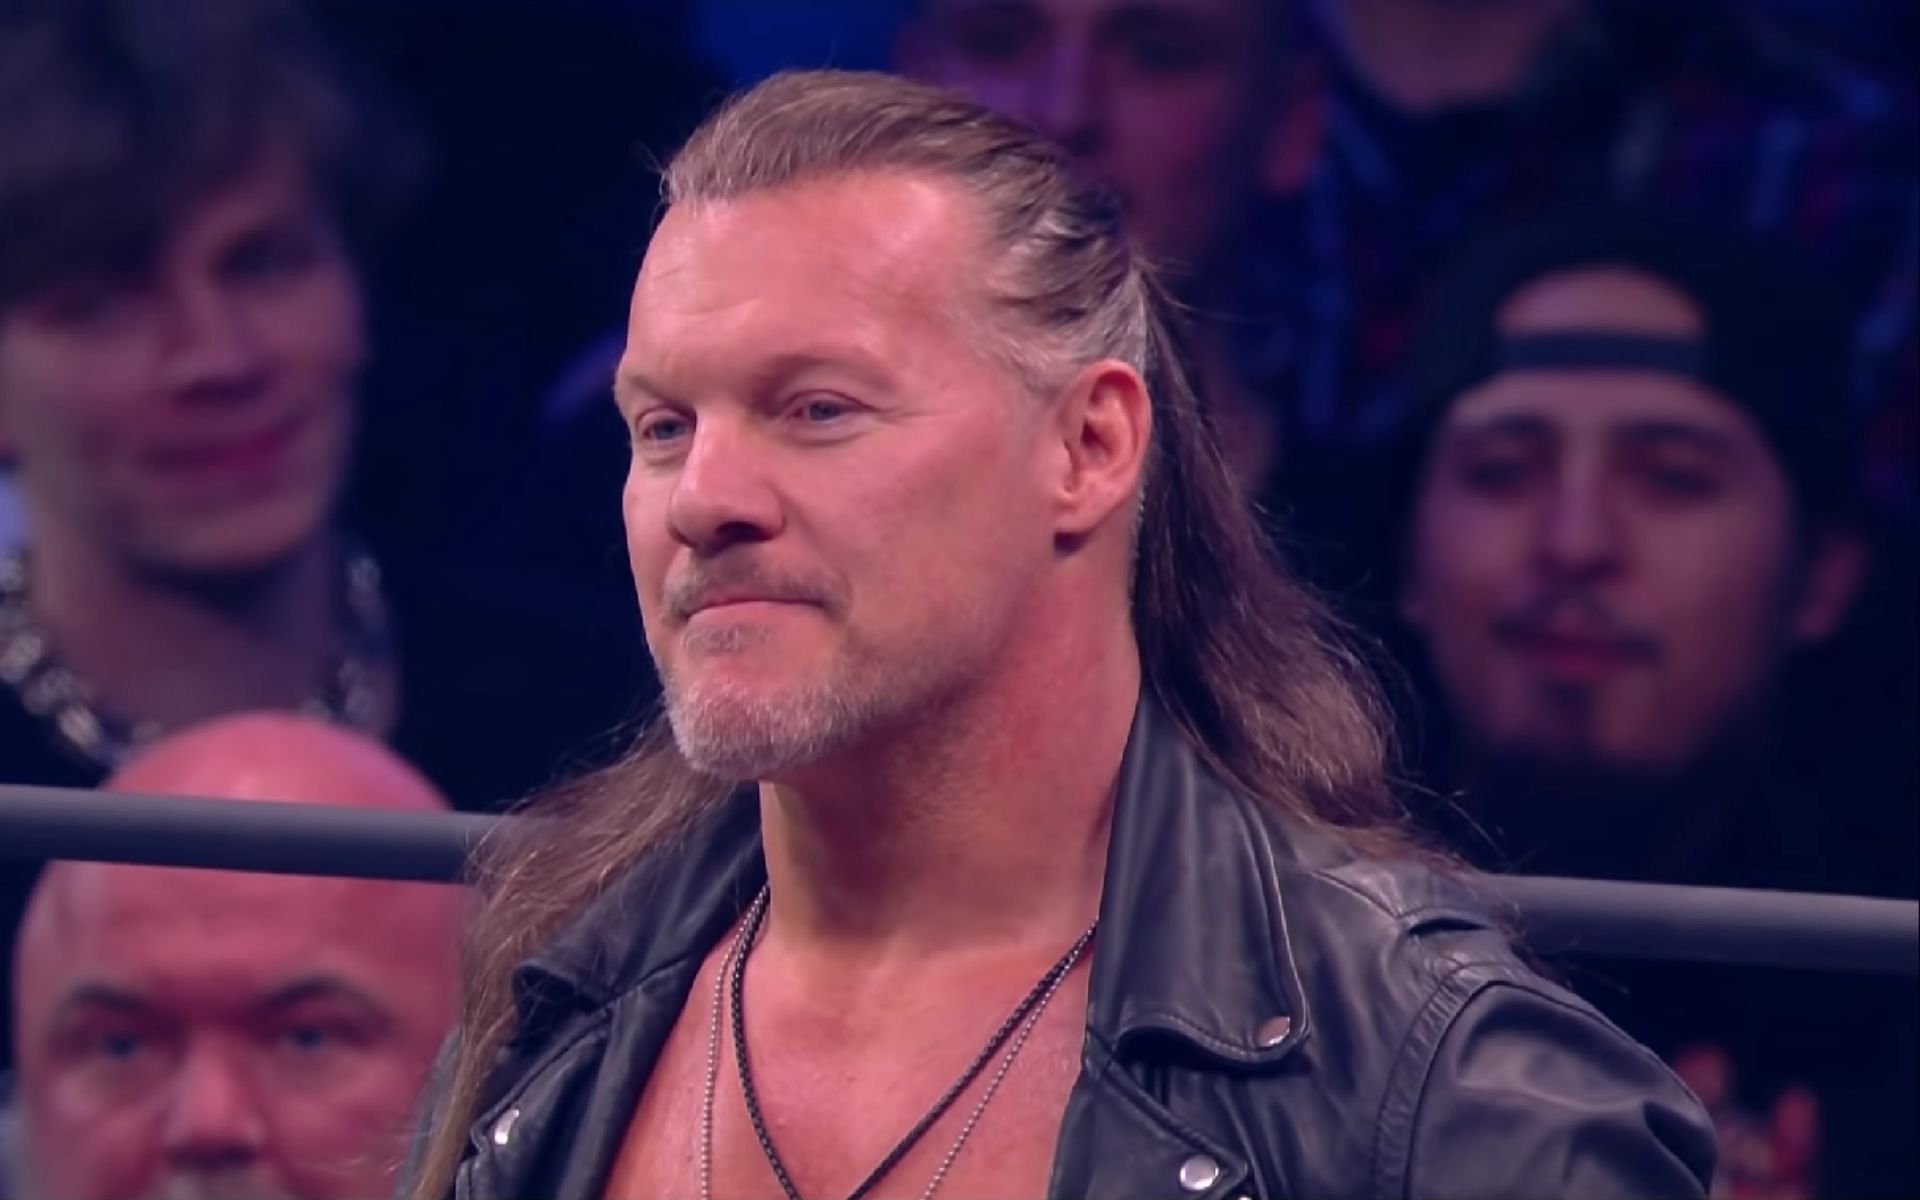 Chris Jericho was victorious last week in a hair vs. hair match on AEW Dynamite.